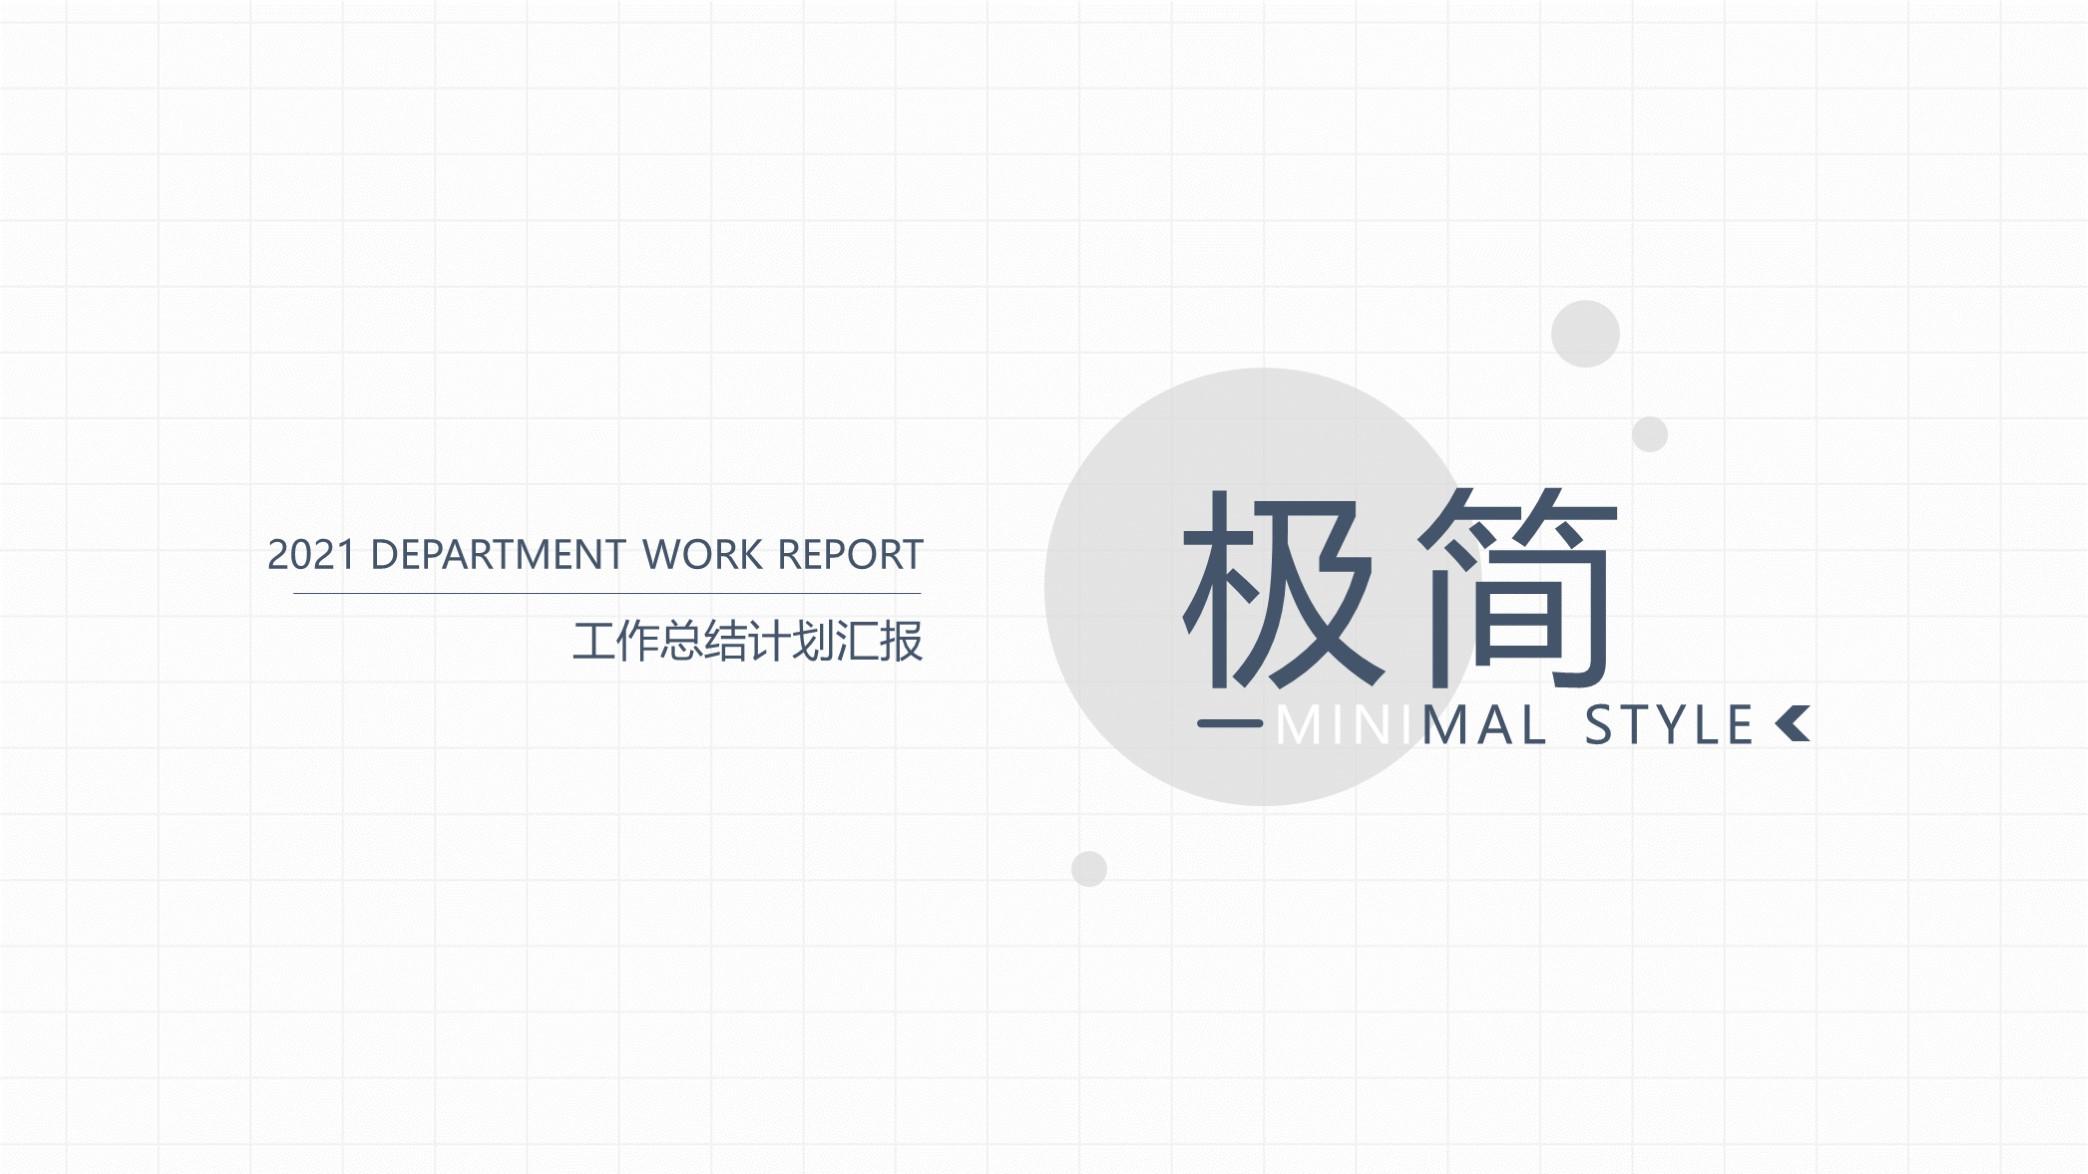 Issue 1417 - Minimalist and elegant work report PPT template